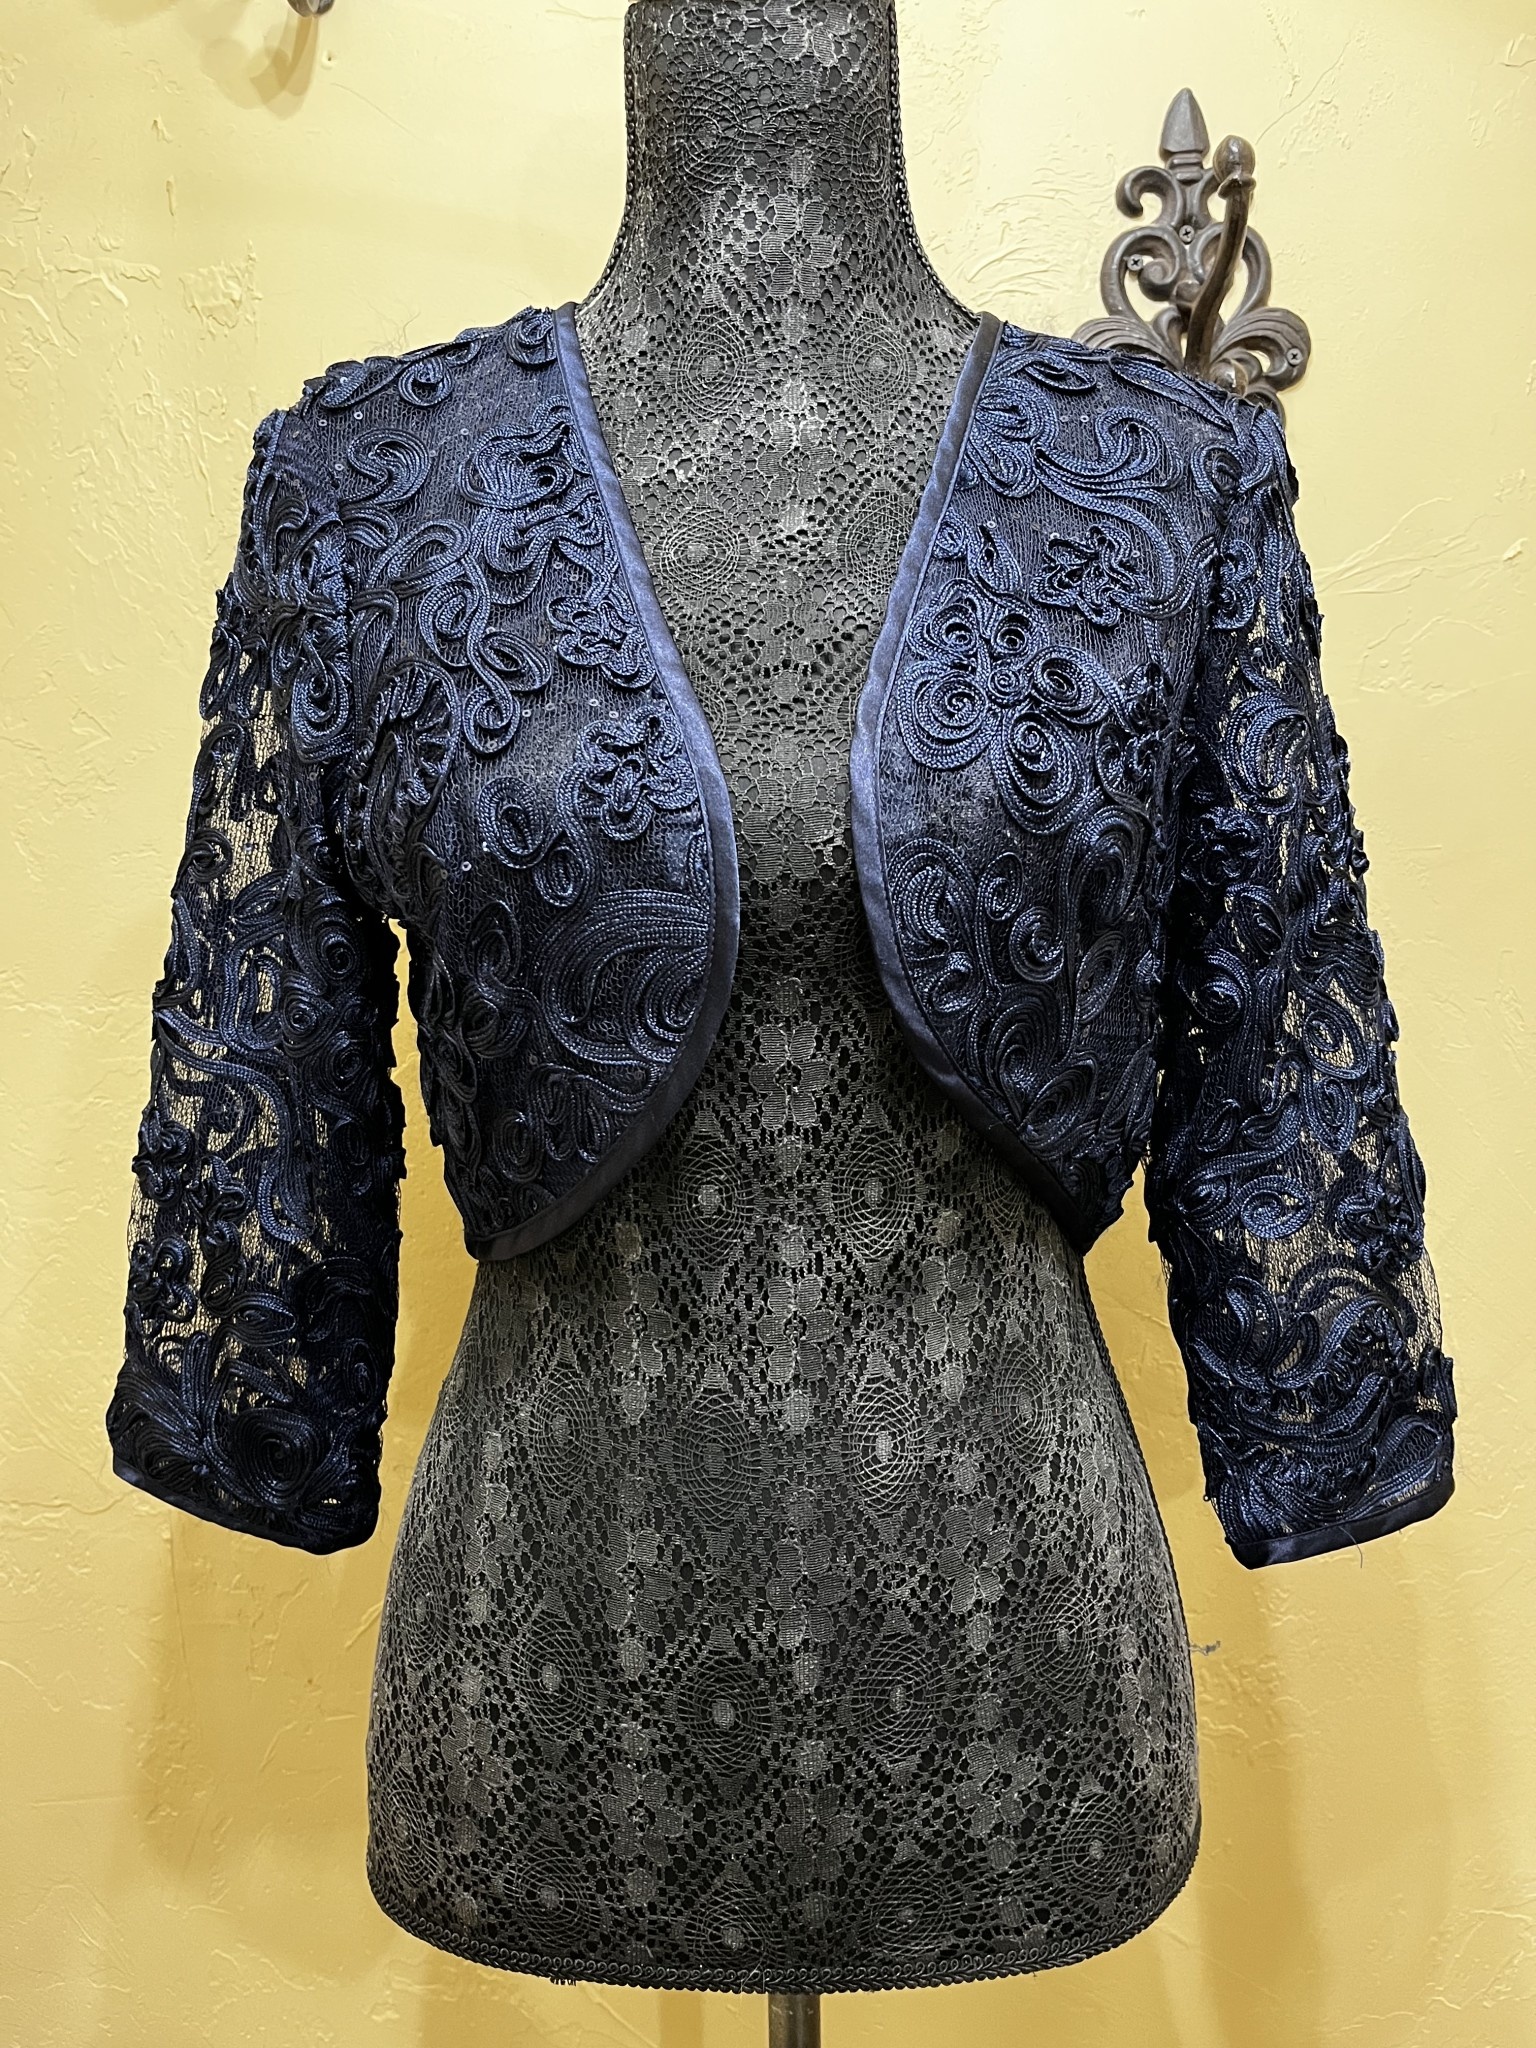 Bloom comment fill in Navy Bolero Jacket with Soutache, Size 6 - Elements Unleashed